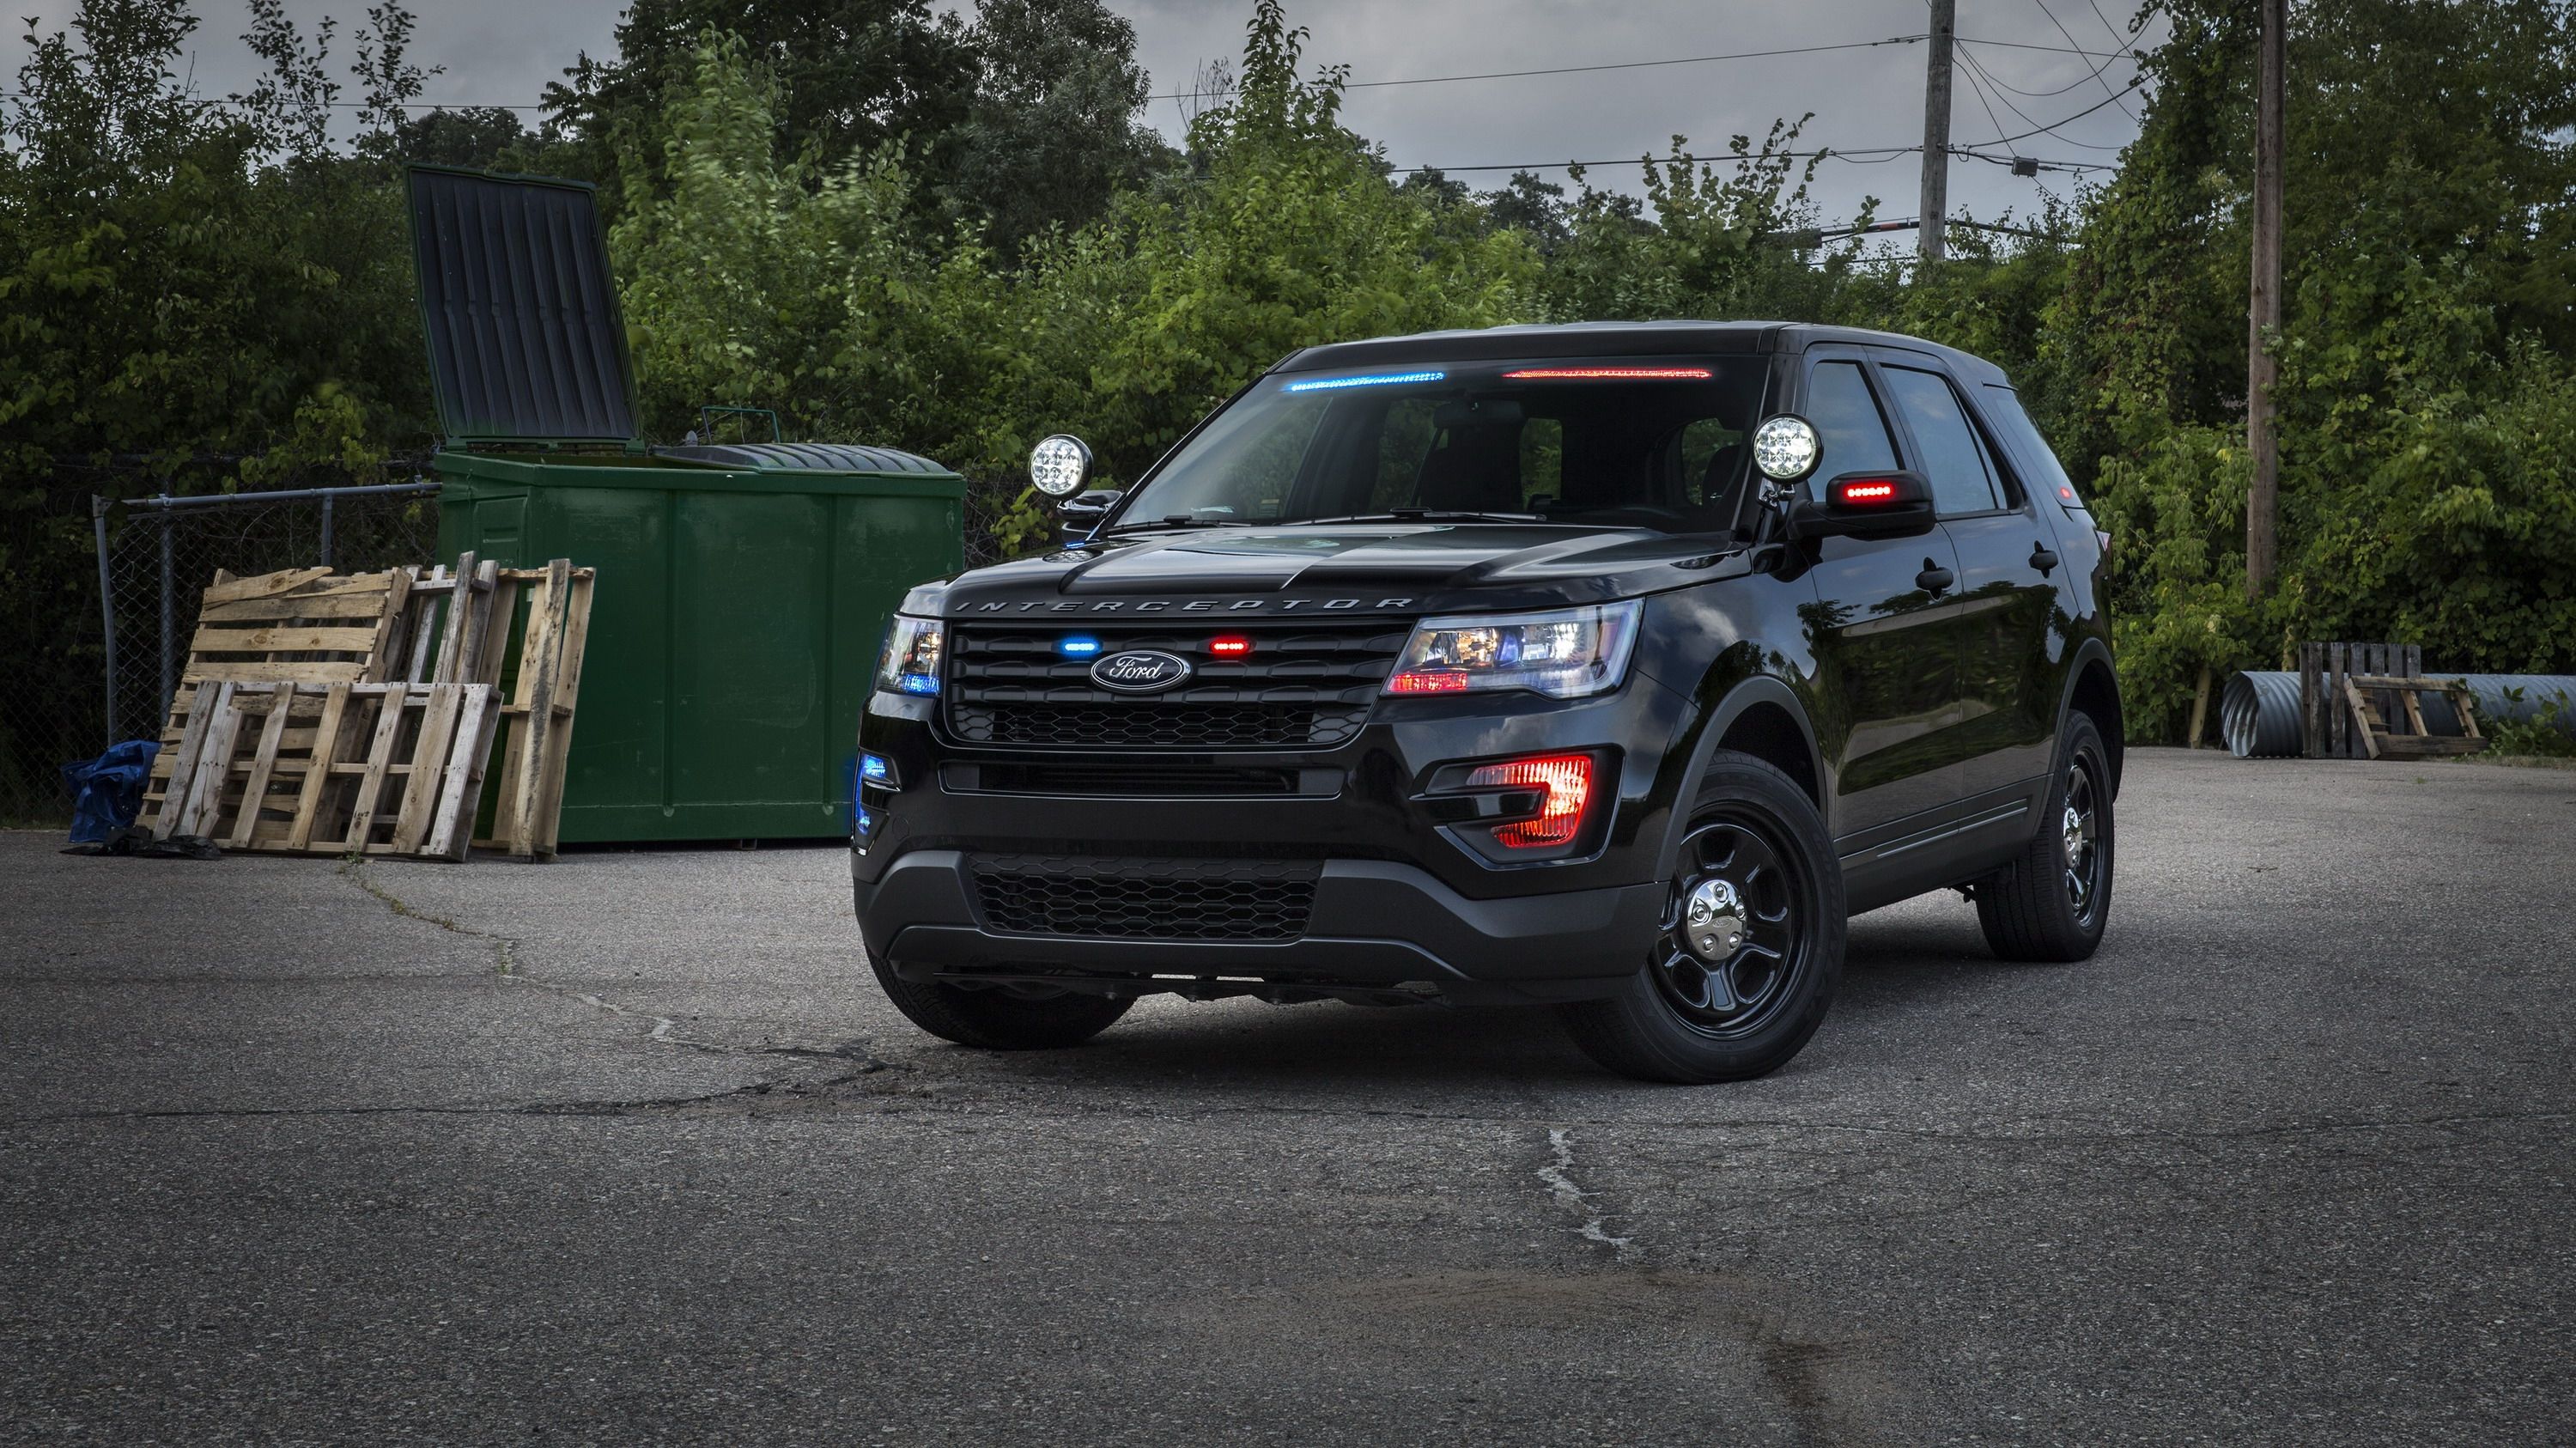 Ford Launches “No Profile” Light Bar For The Police Interceptor Utility Picture, Photo, Wallpaper